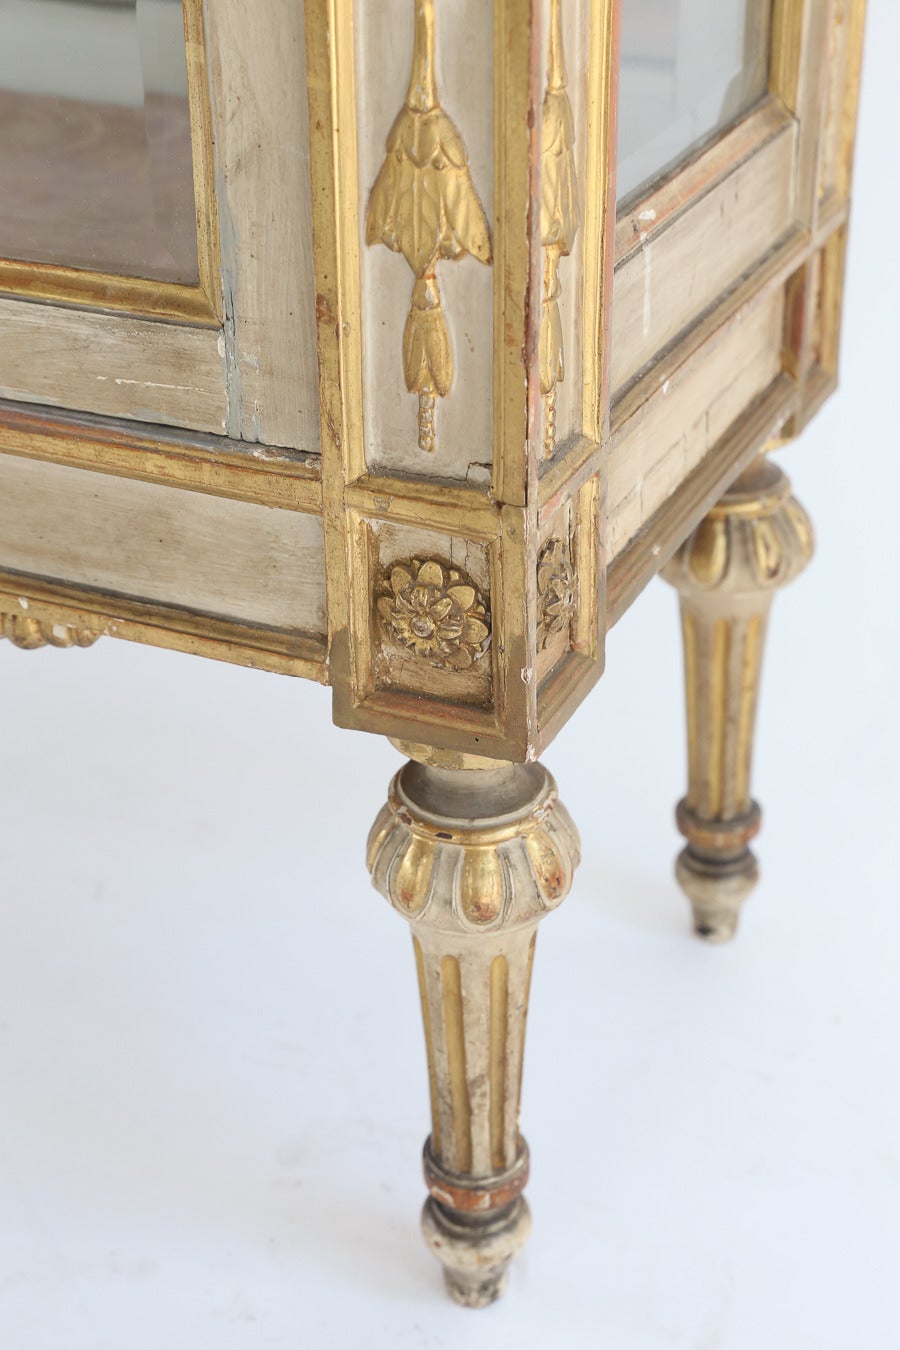 19th century antique neoclassical cream painted and gold leaf vitrine.

The cornice is centered by an open carved ribbon over a pair of doors
fitted with beveled glass panels flanked by stiles carved
with pendant bellflowers and headed with leafy